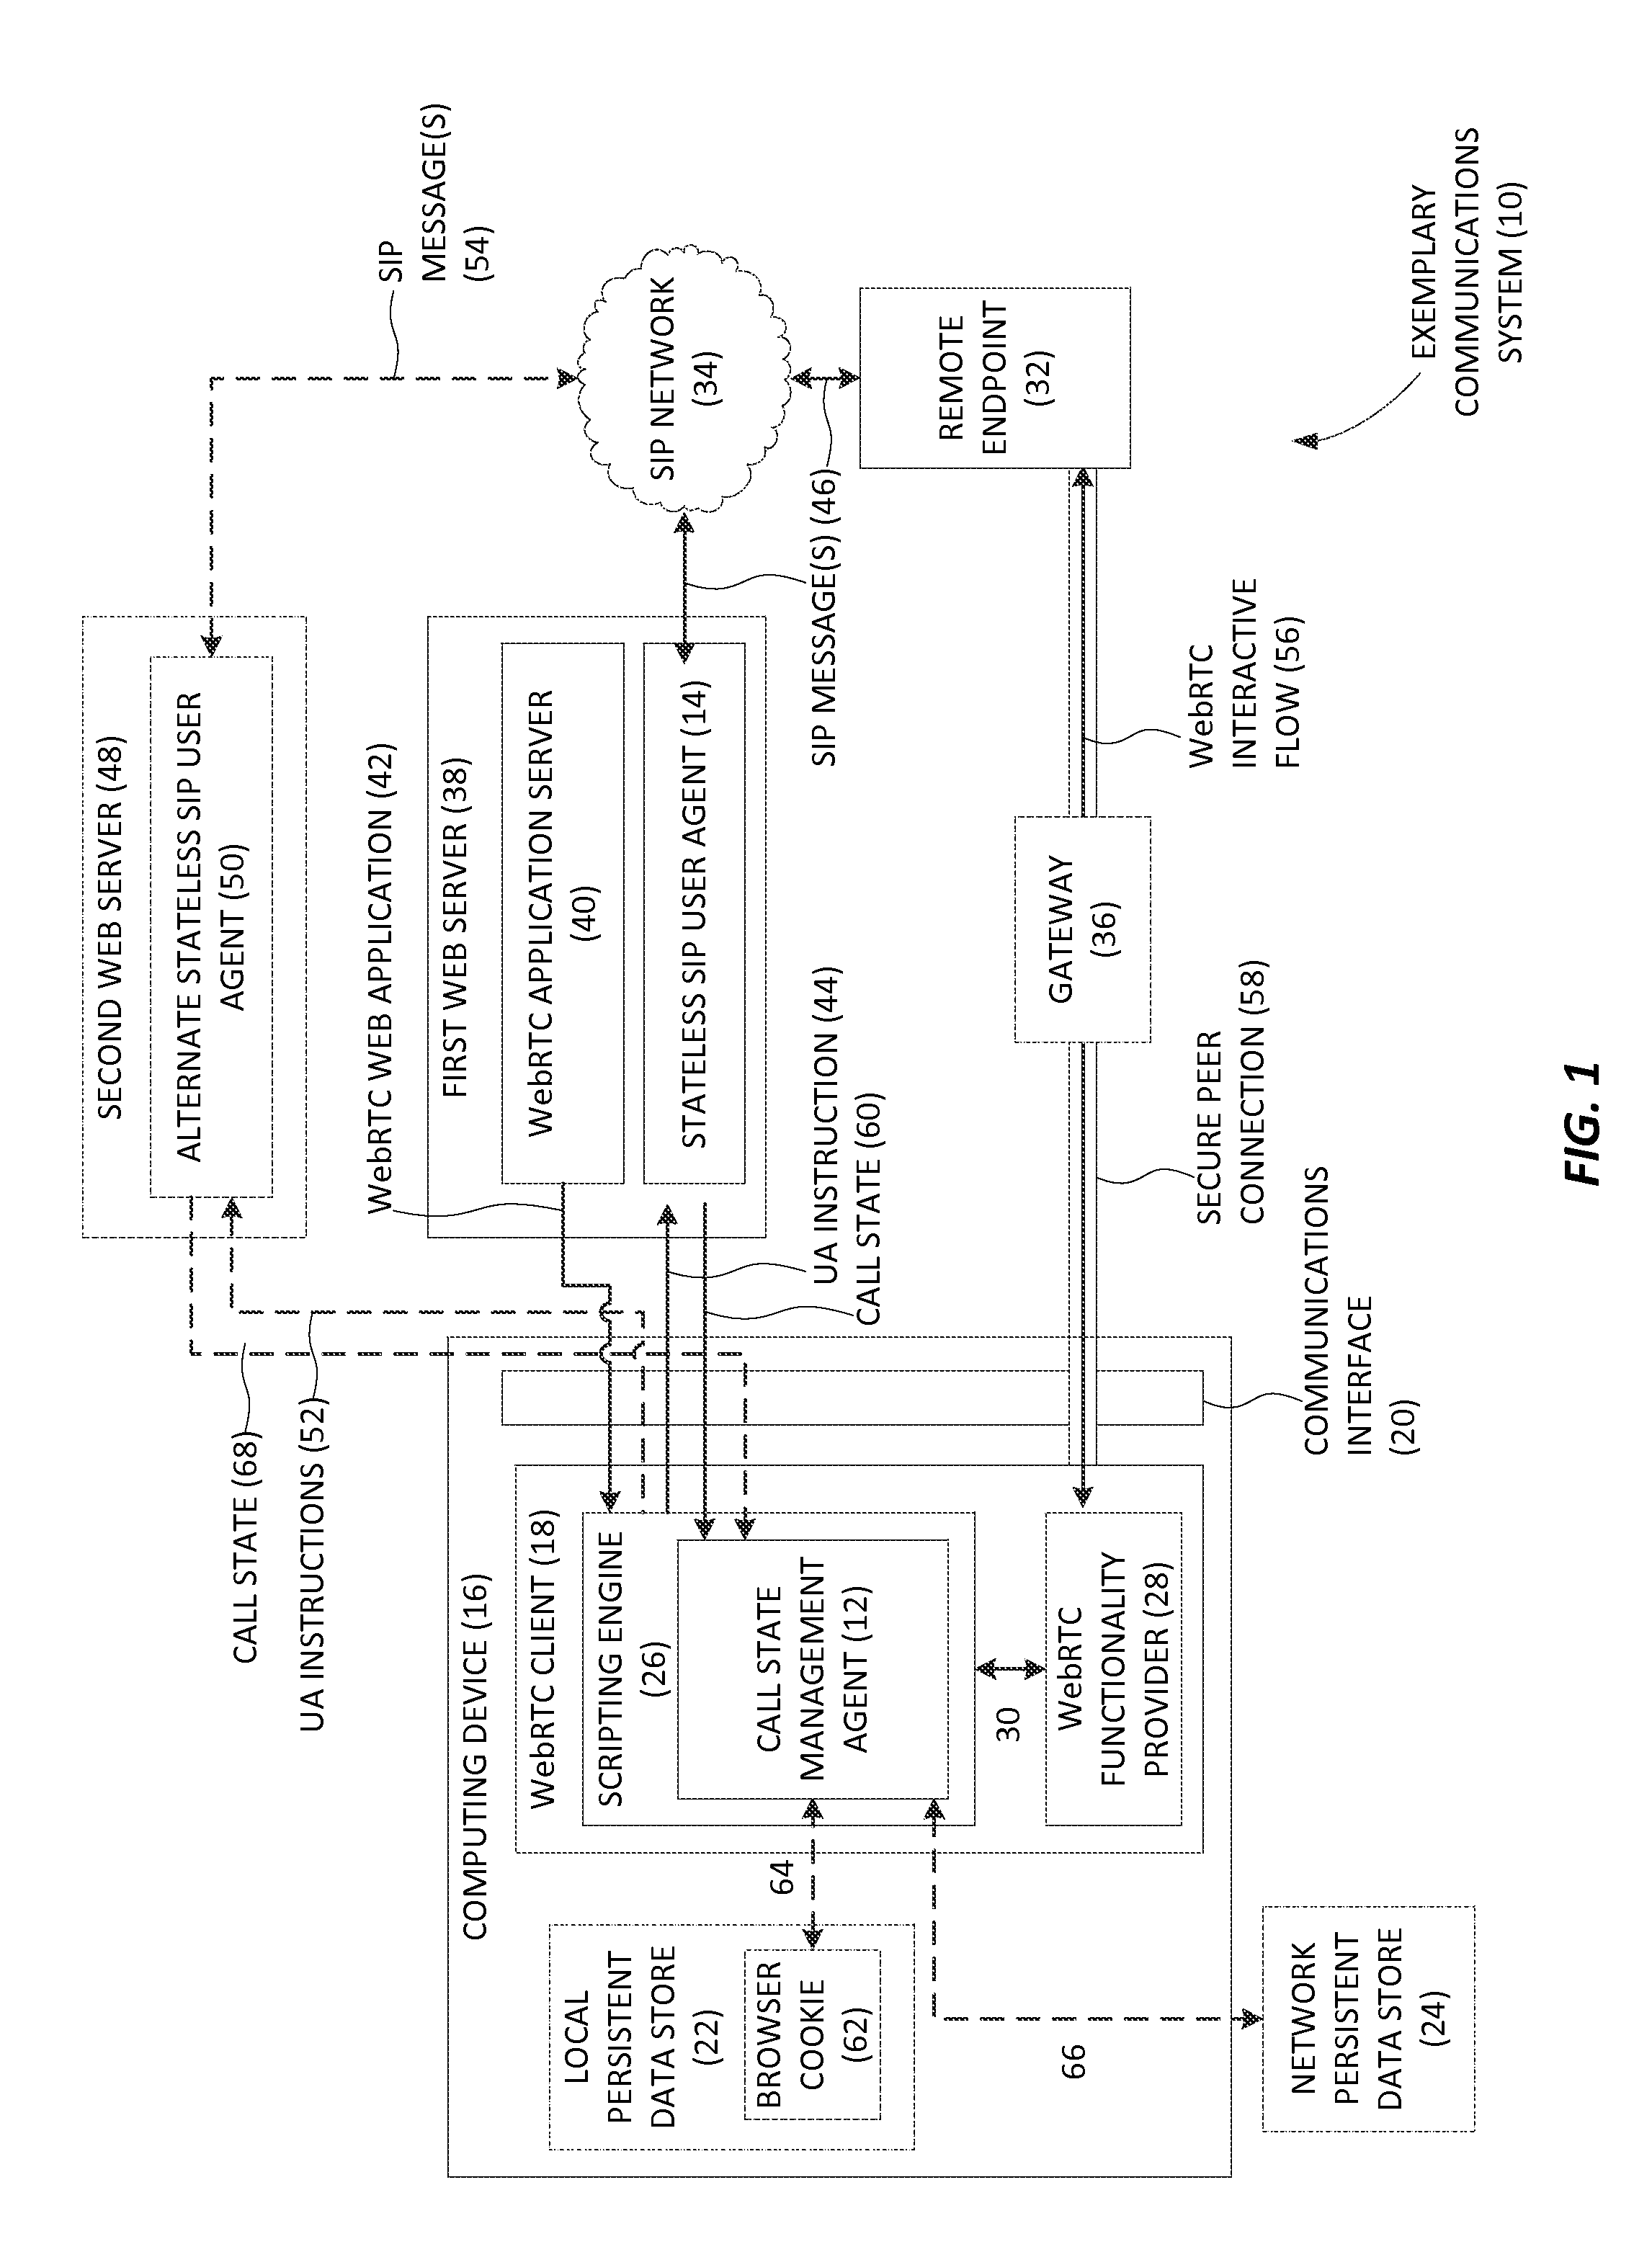 Providing reliable session initiation protocol (SIP) signaling for web real-time communications (webrtc) interactive flows, and related methods, systems, and computer-readable media